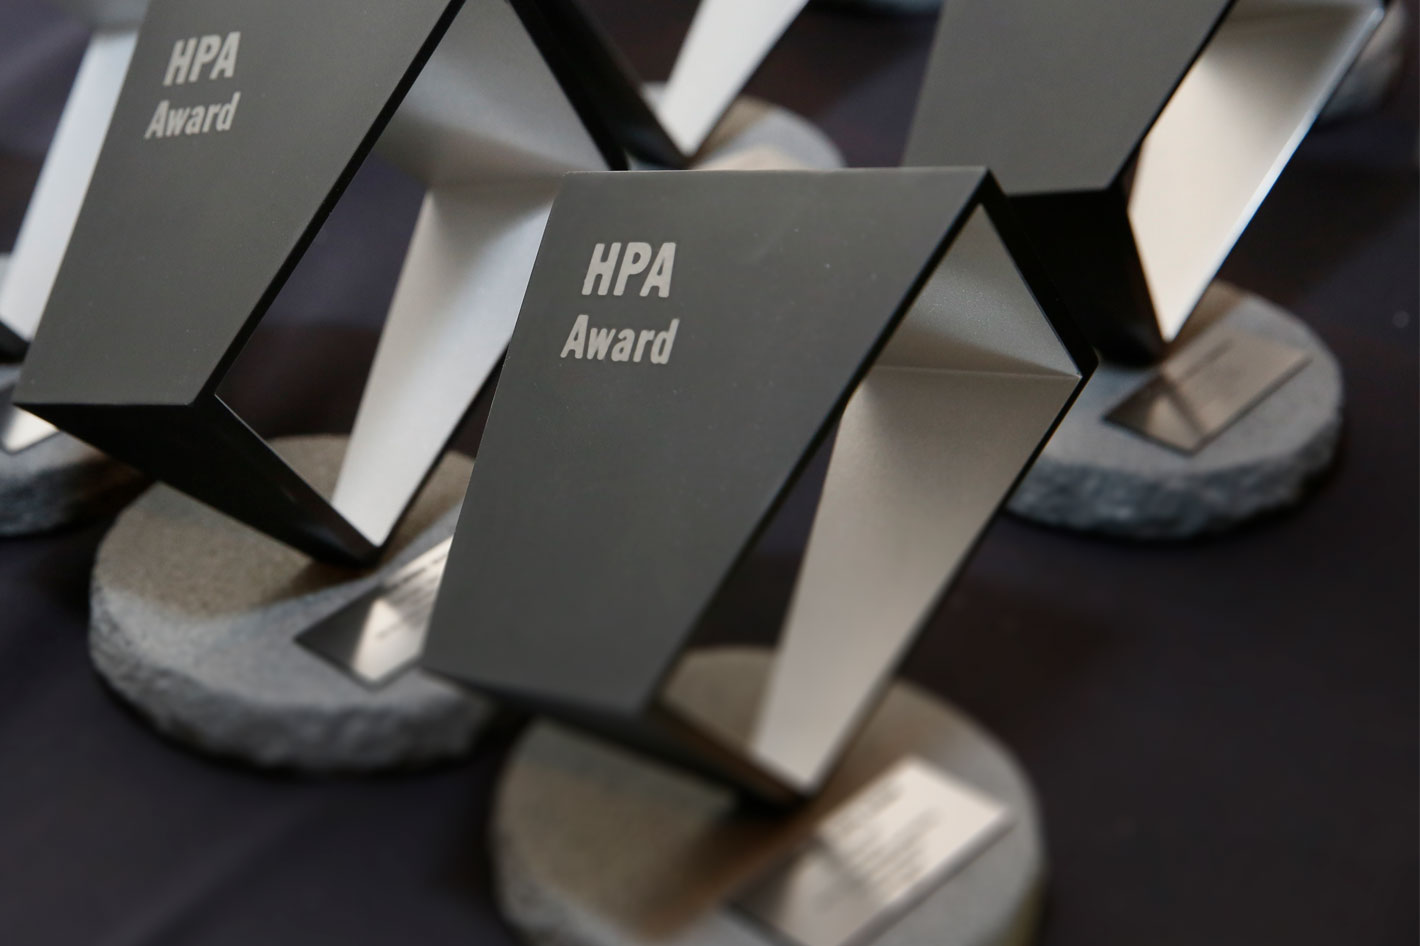 HPA Awards returns as an in person event and calls for submissions